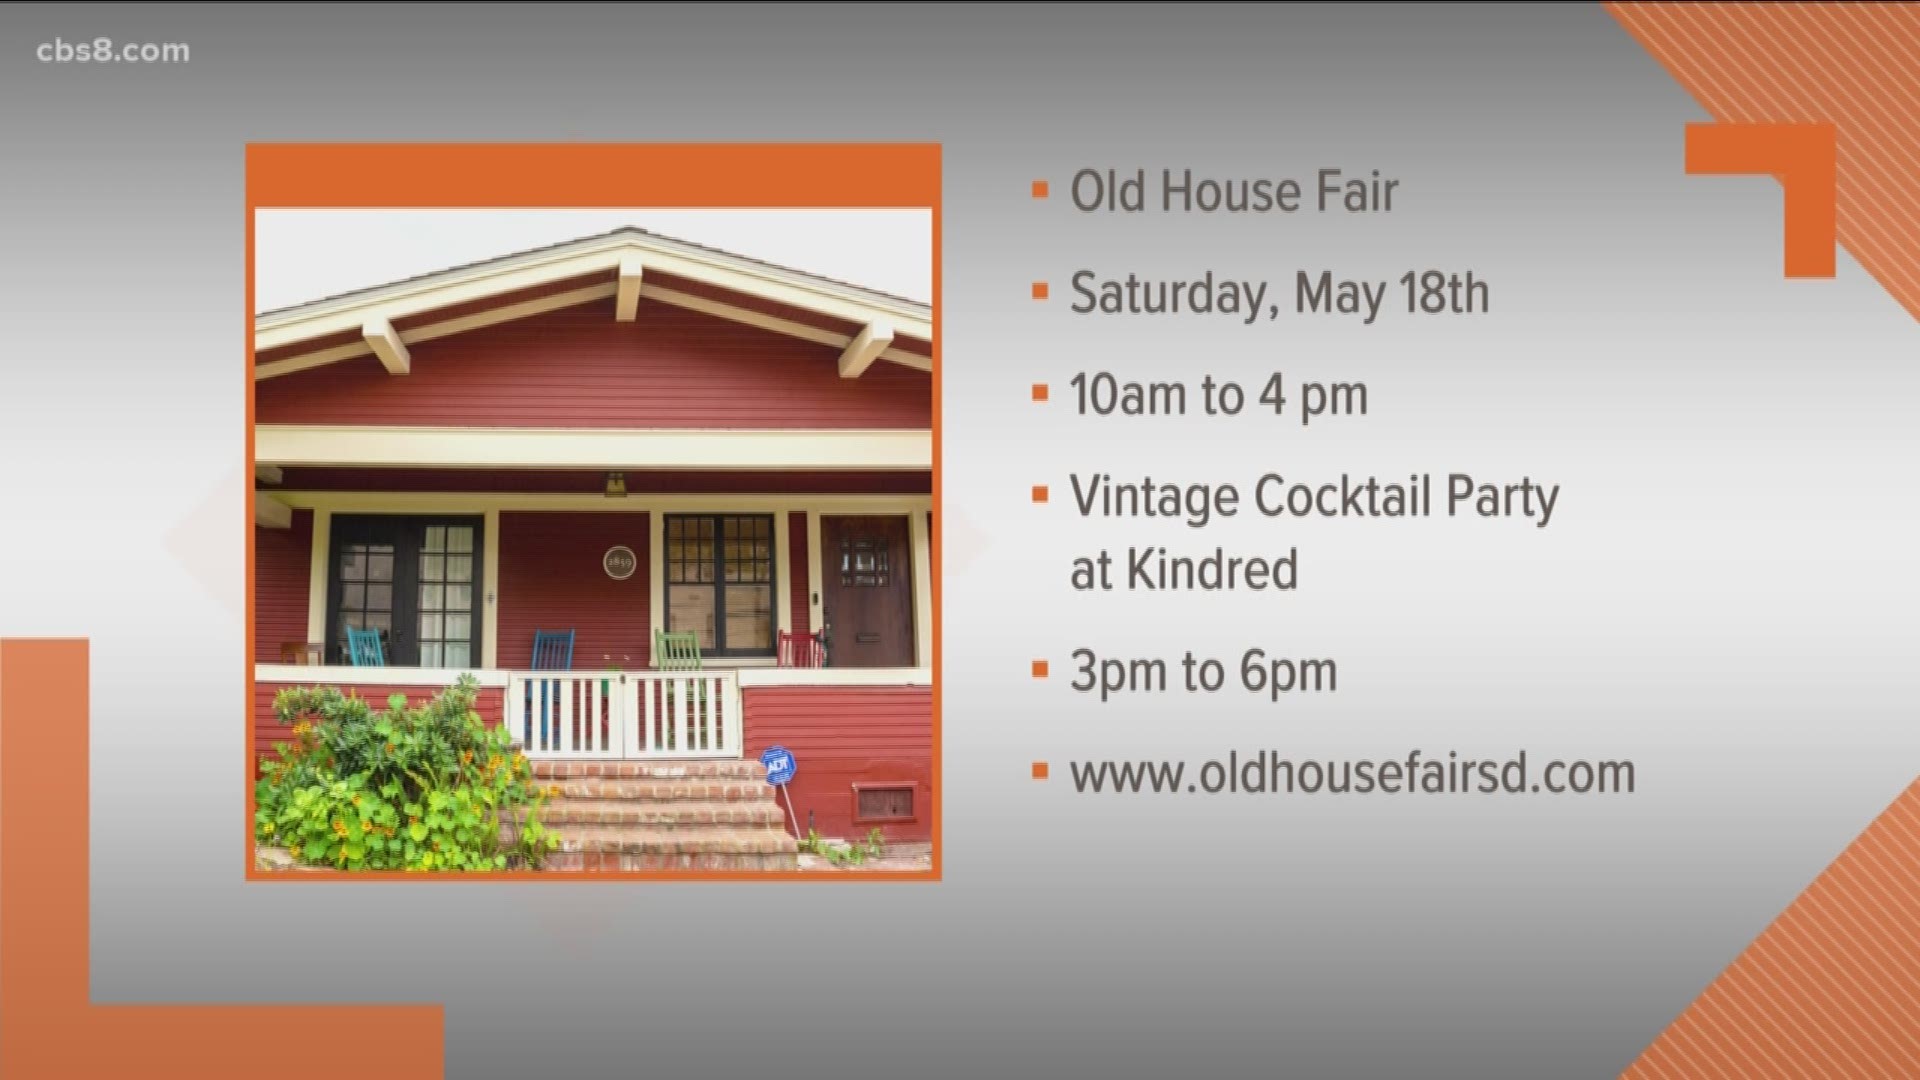 The 21st annual Old House Fair, on May 18th 2019, is a celebration of South Park's art + architecture.